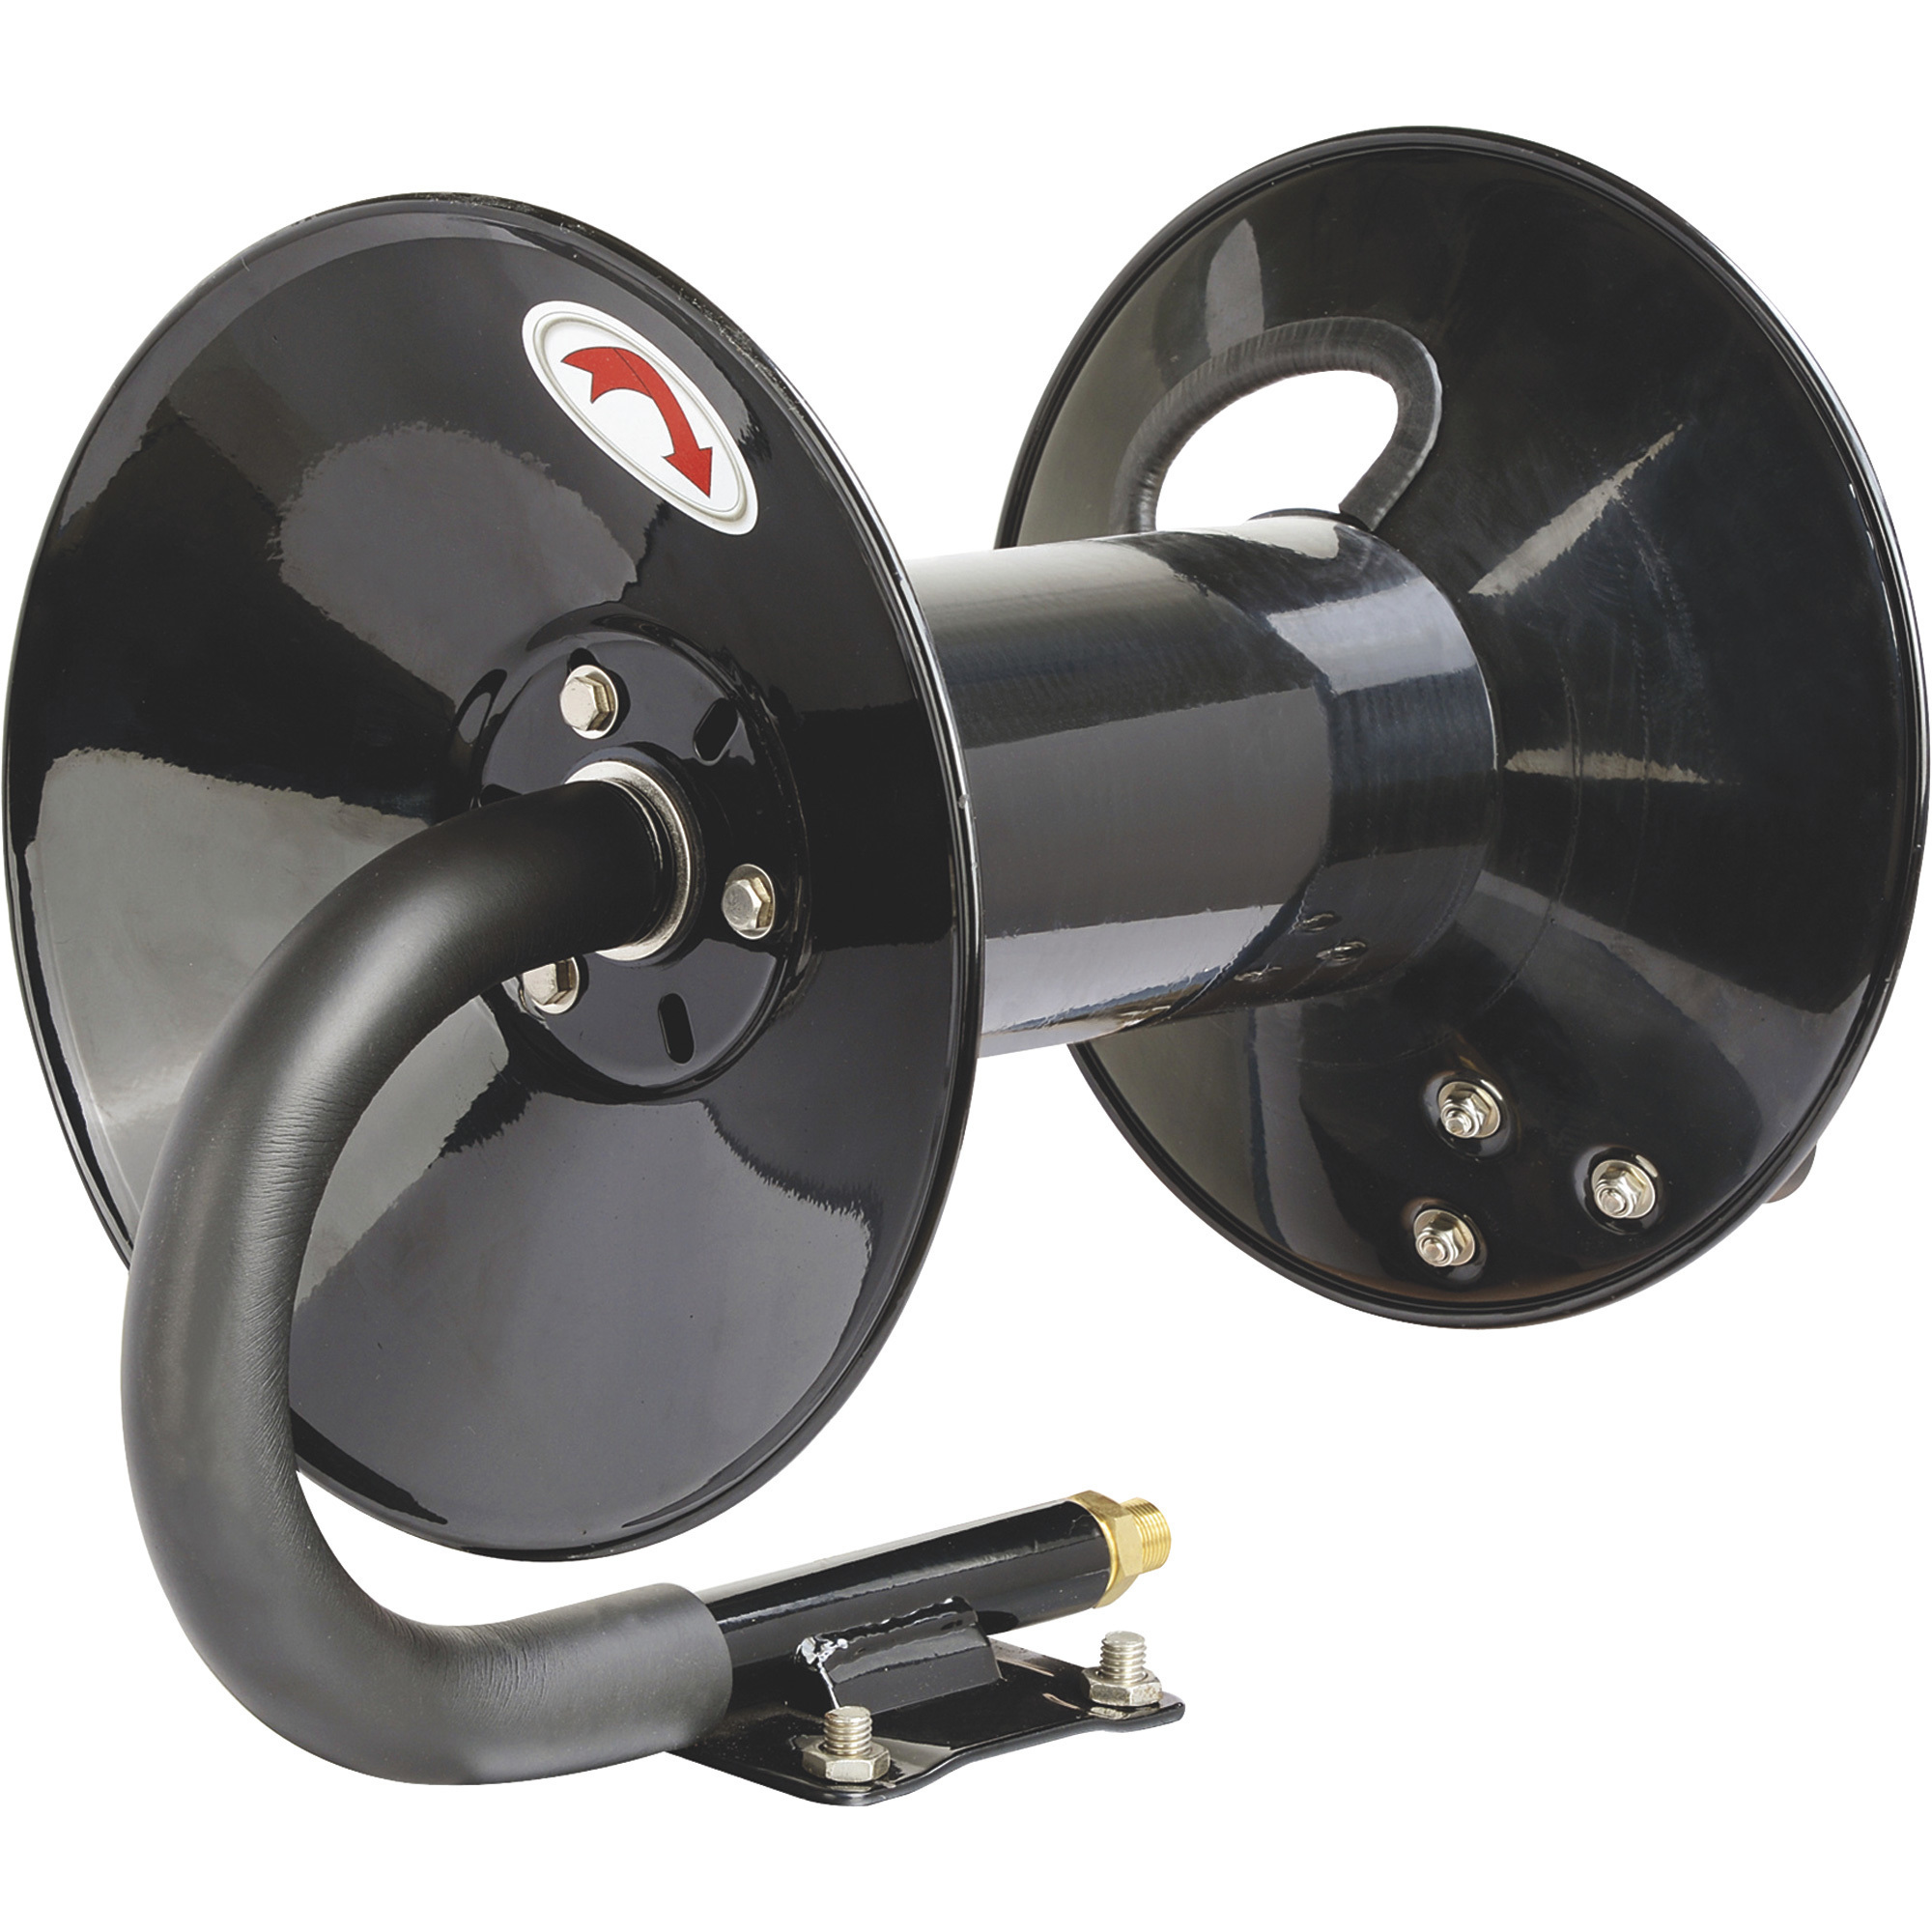 Ironton Air Hose Reel with Hand Brake, Holds 3/8Inch x 100ft. Hose, Max. 300 PSI